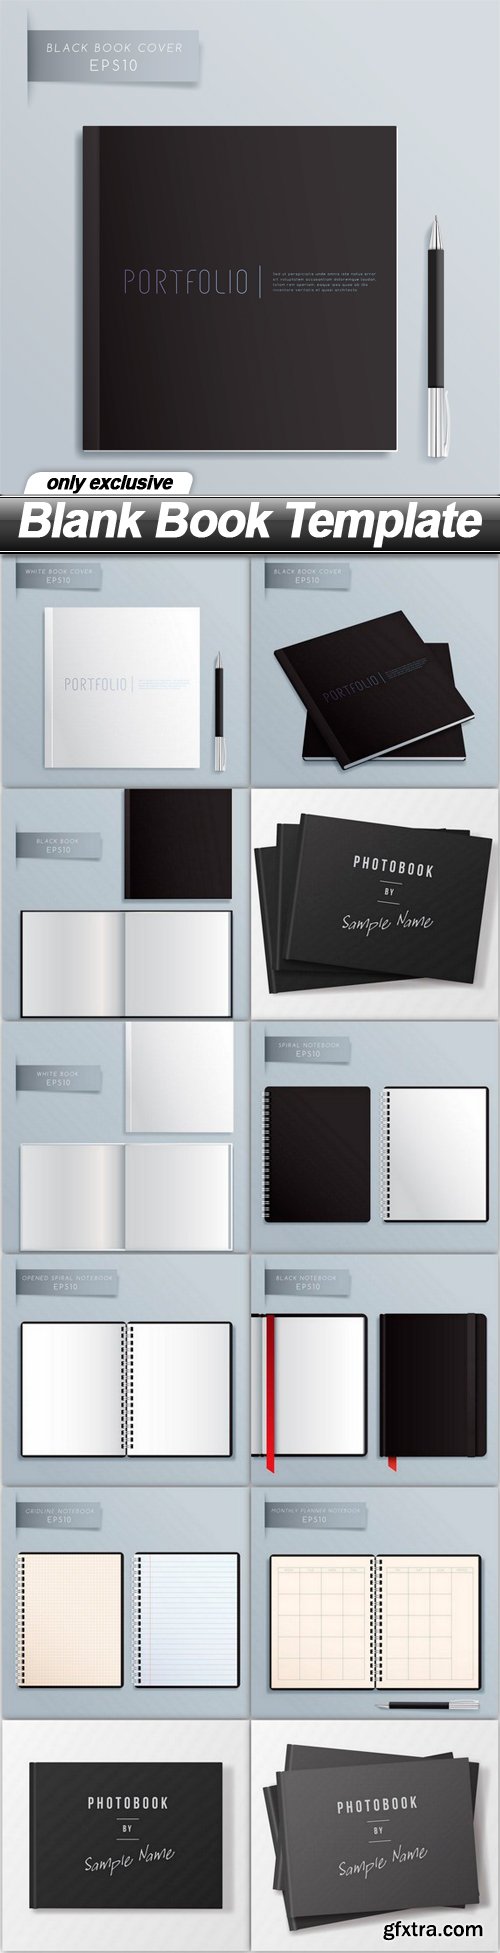 Blank Book Template - 13 EPS